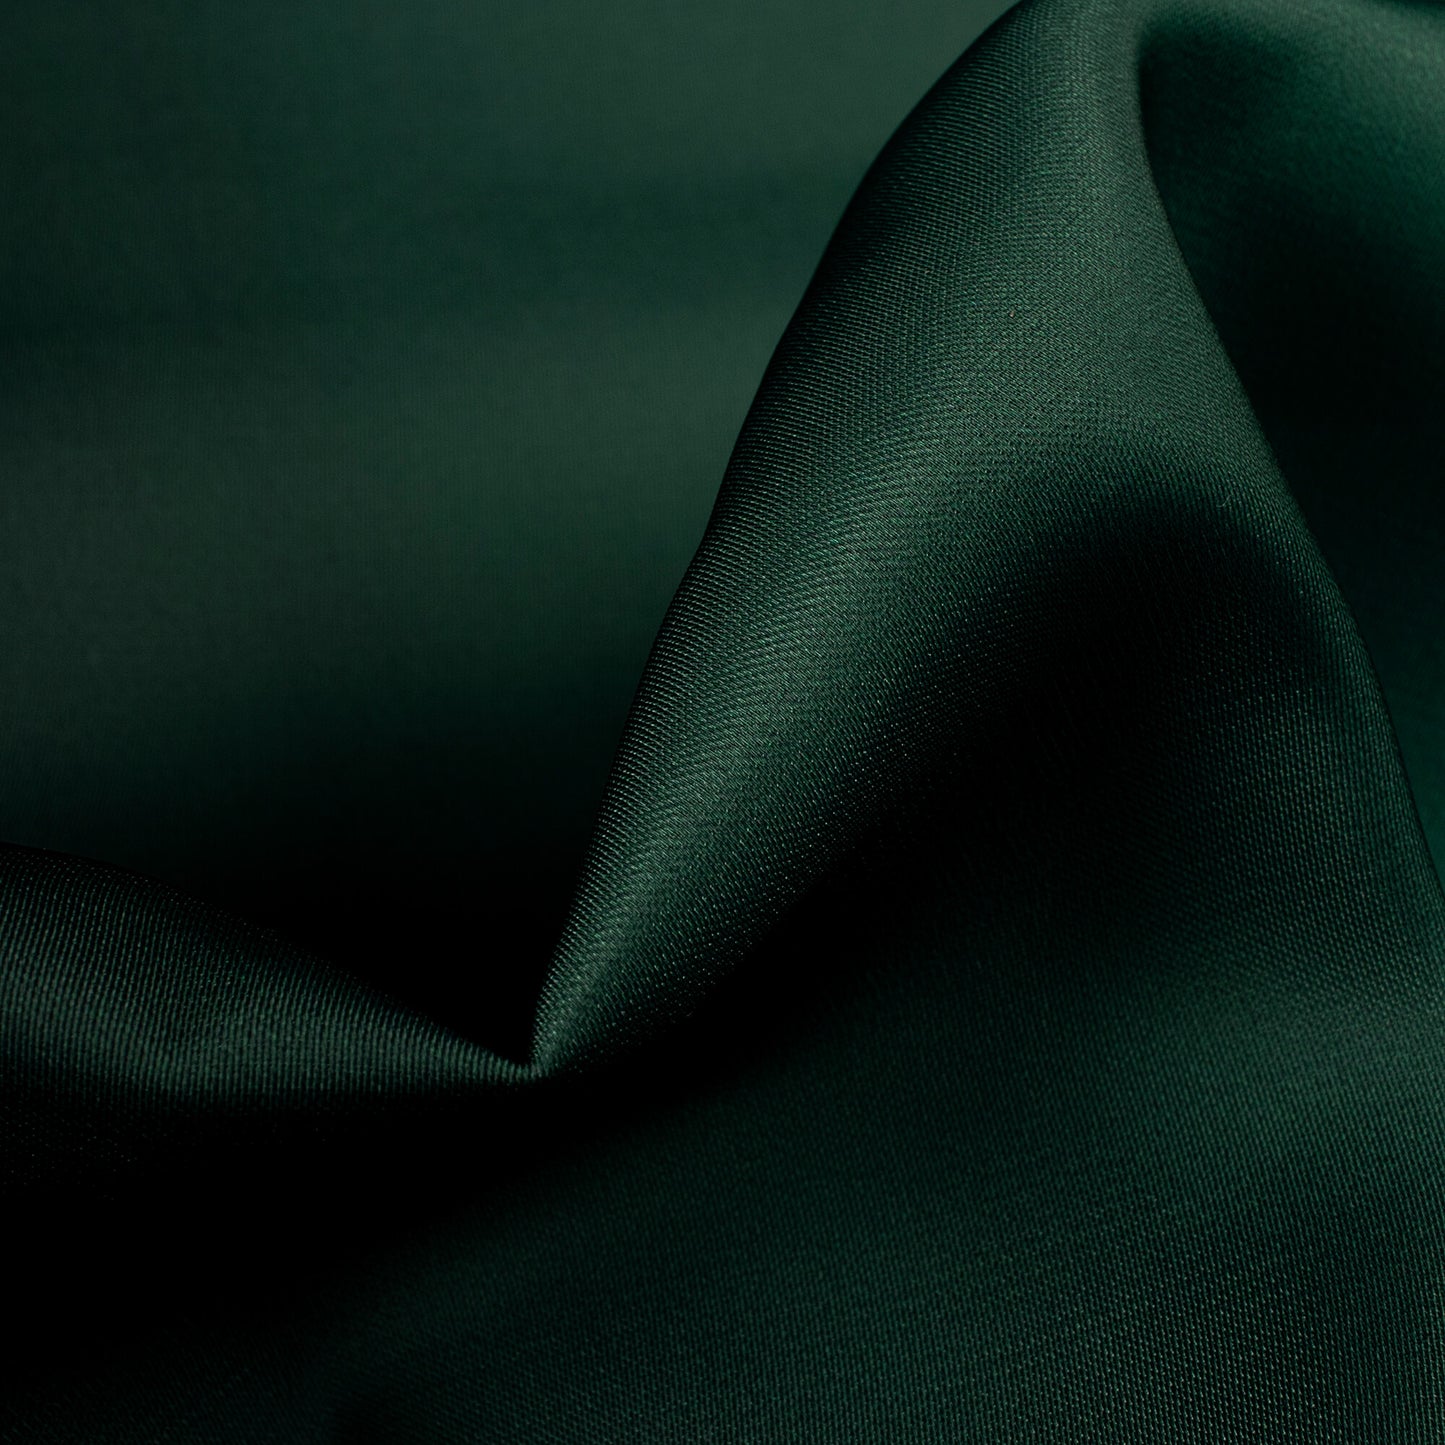 Green And Black Ombre Digital Print Imported Satin Fabric